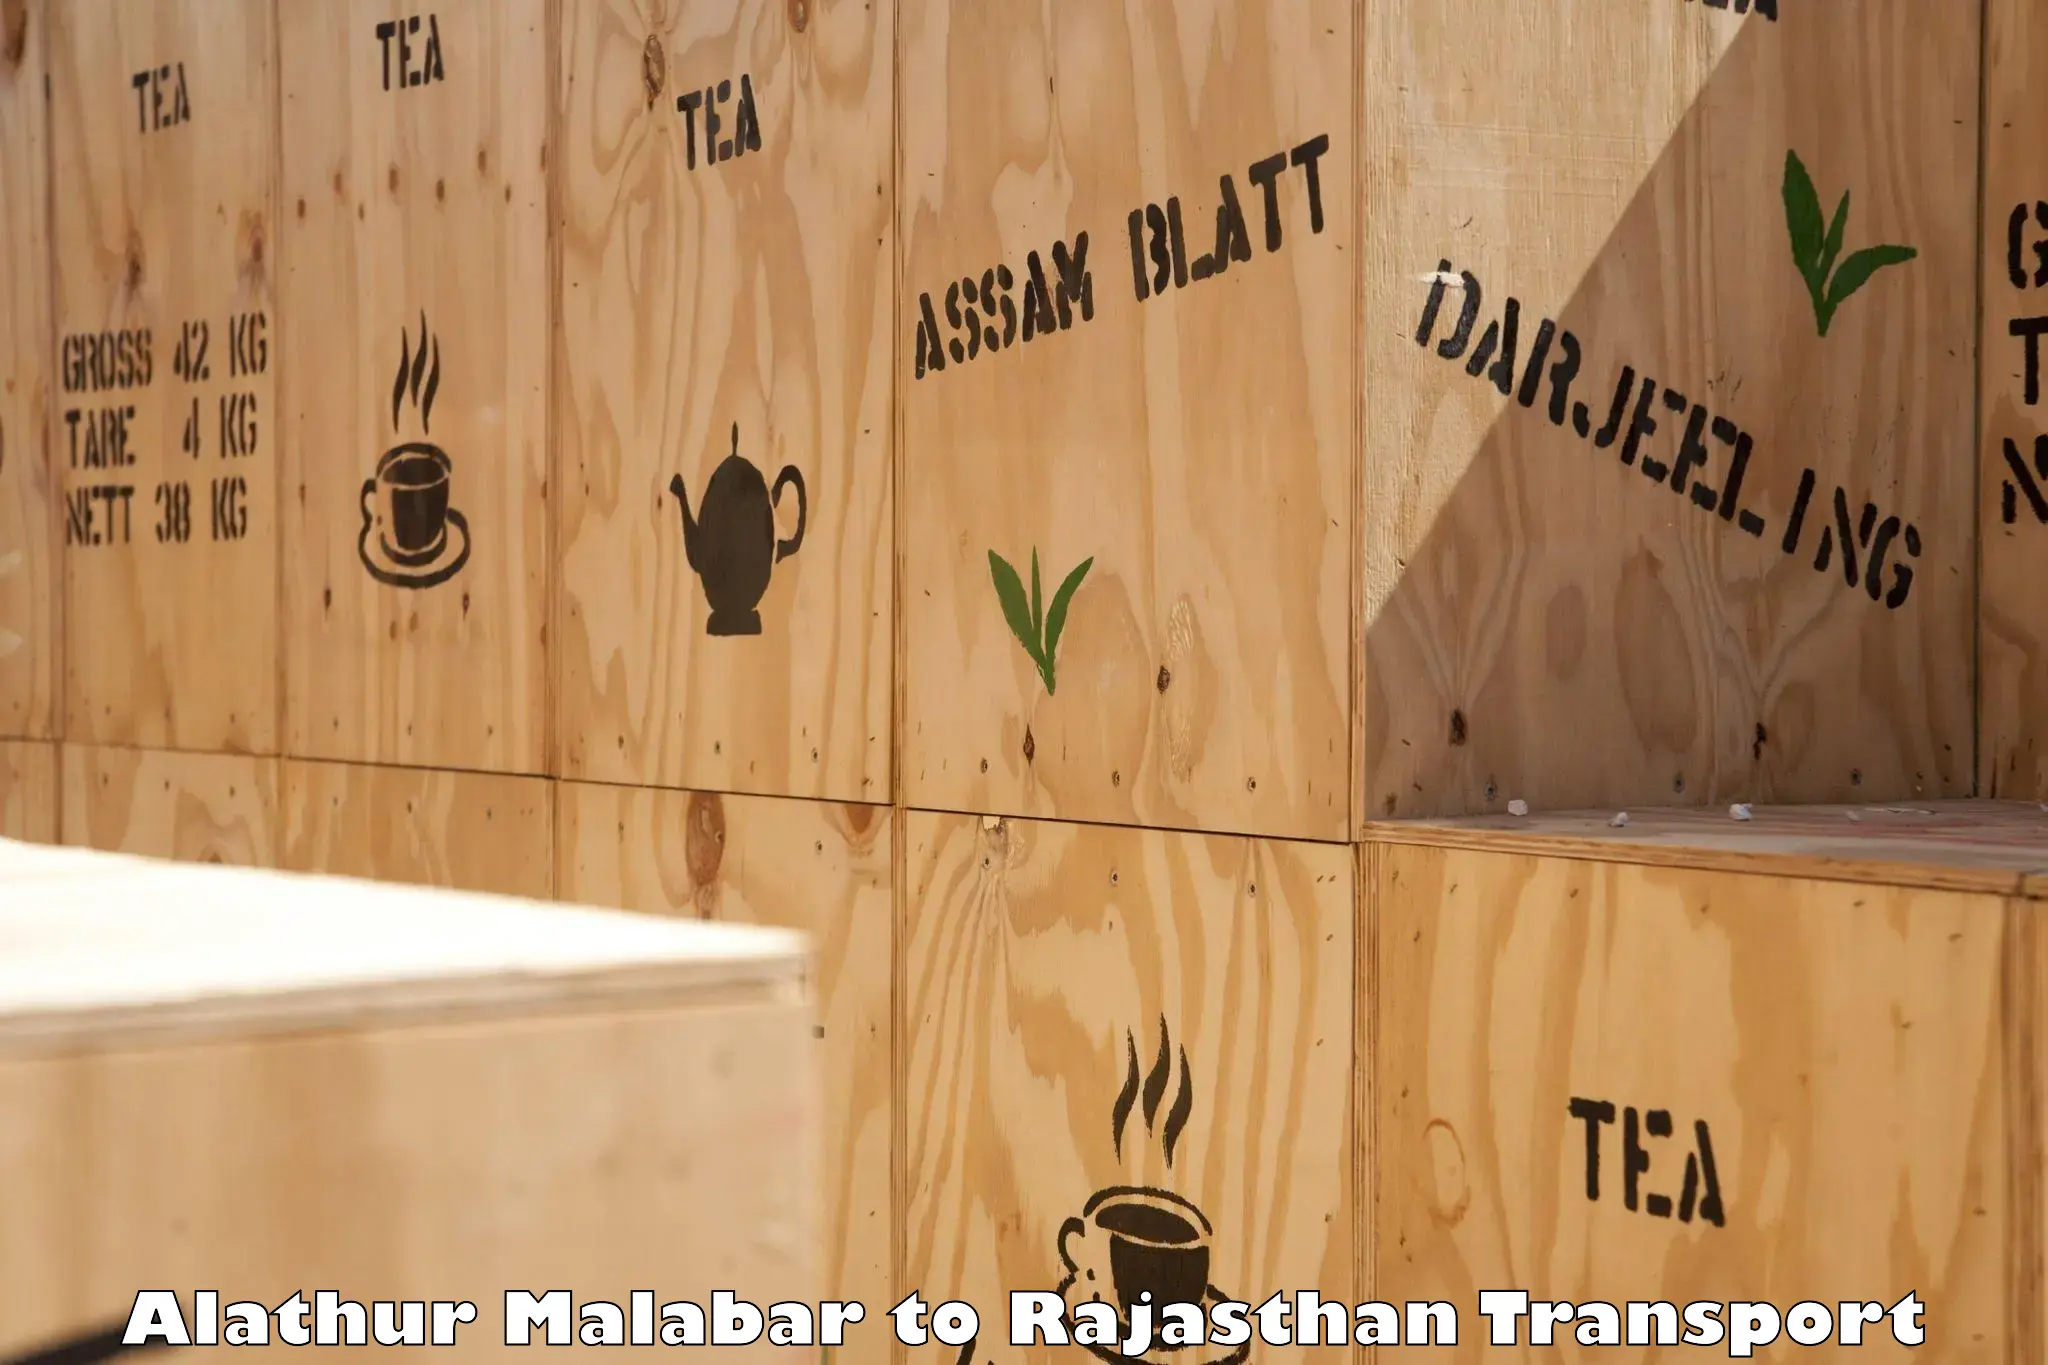 Container transport service Alathur Malabar to Rajasthan